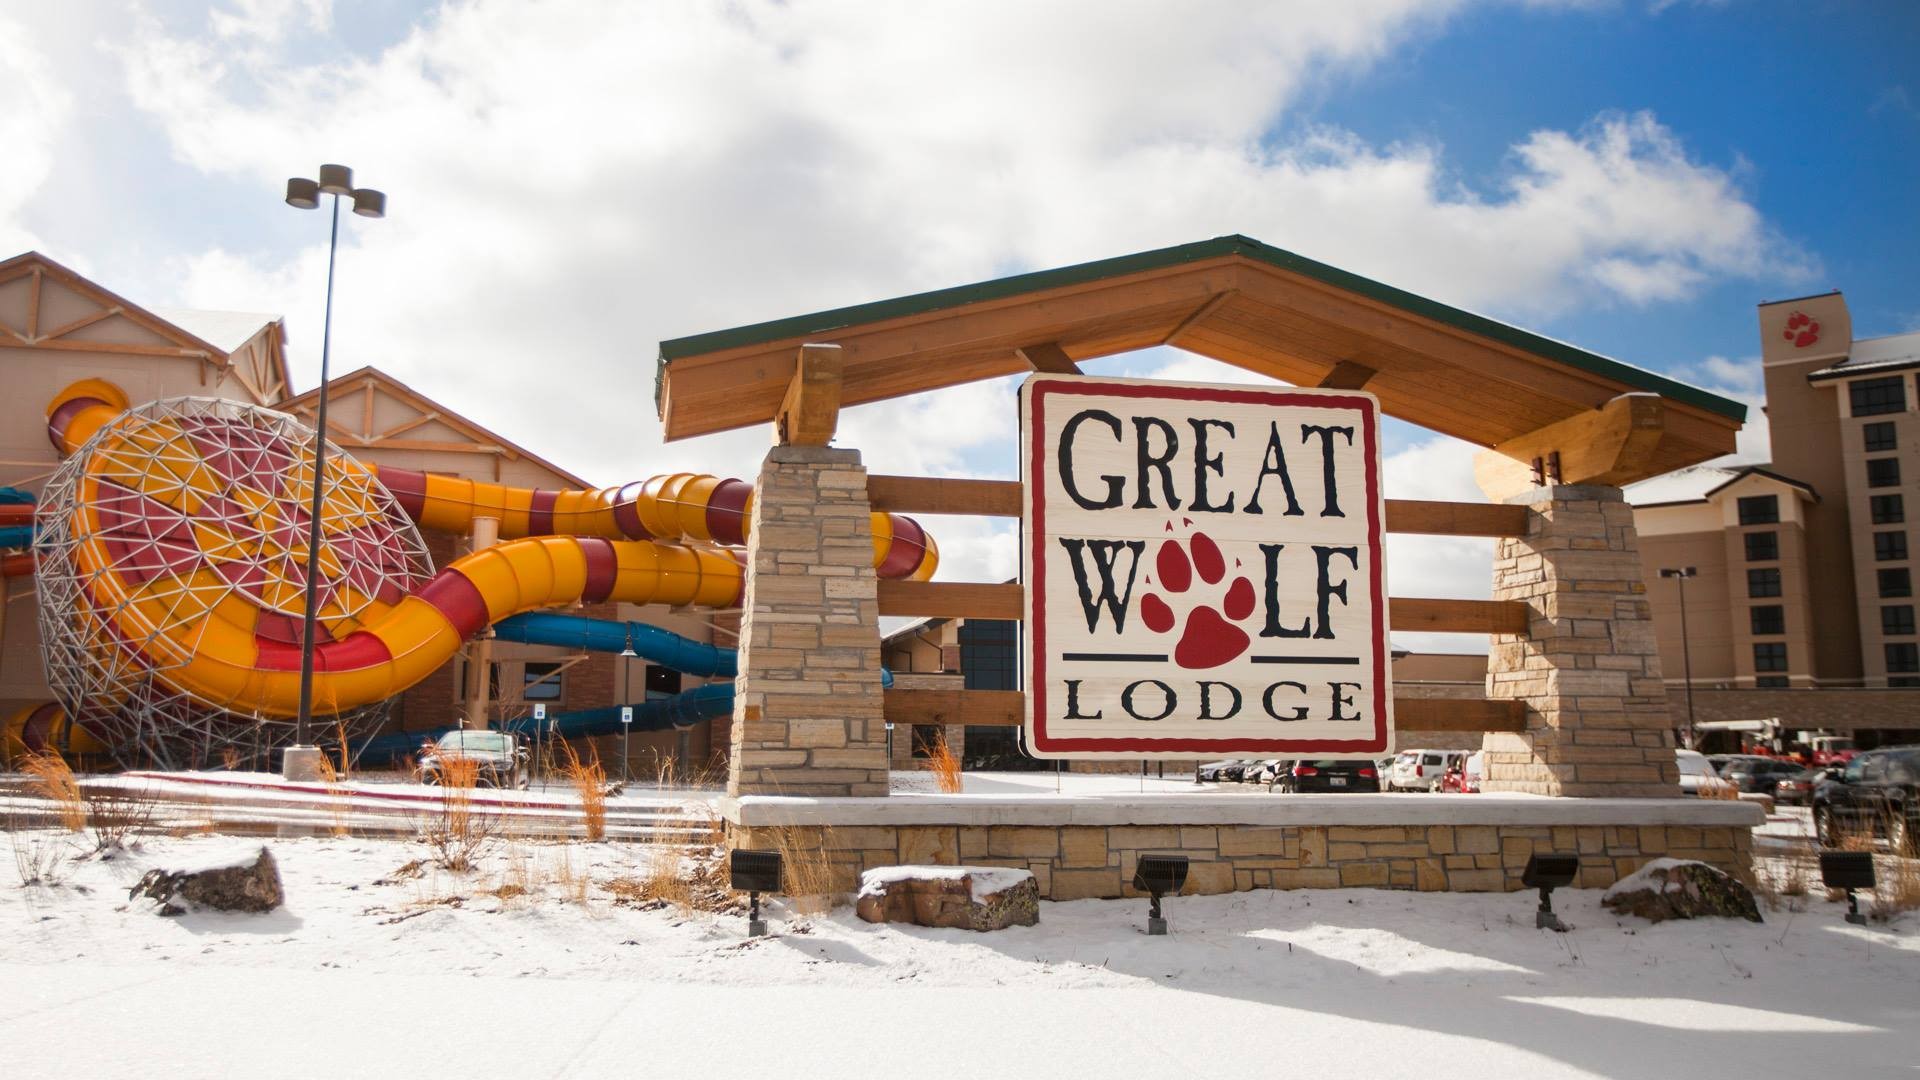 Great Wolf Lodge. Southern Colorado. Hotels and Resorts, Attractions and Amusement Parks